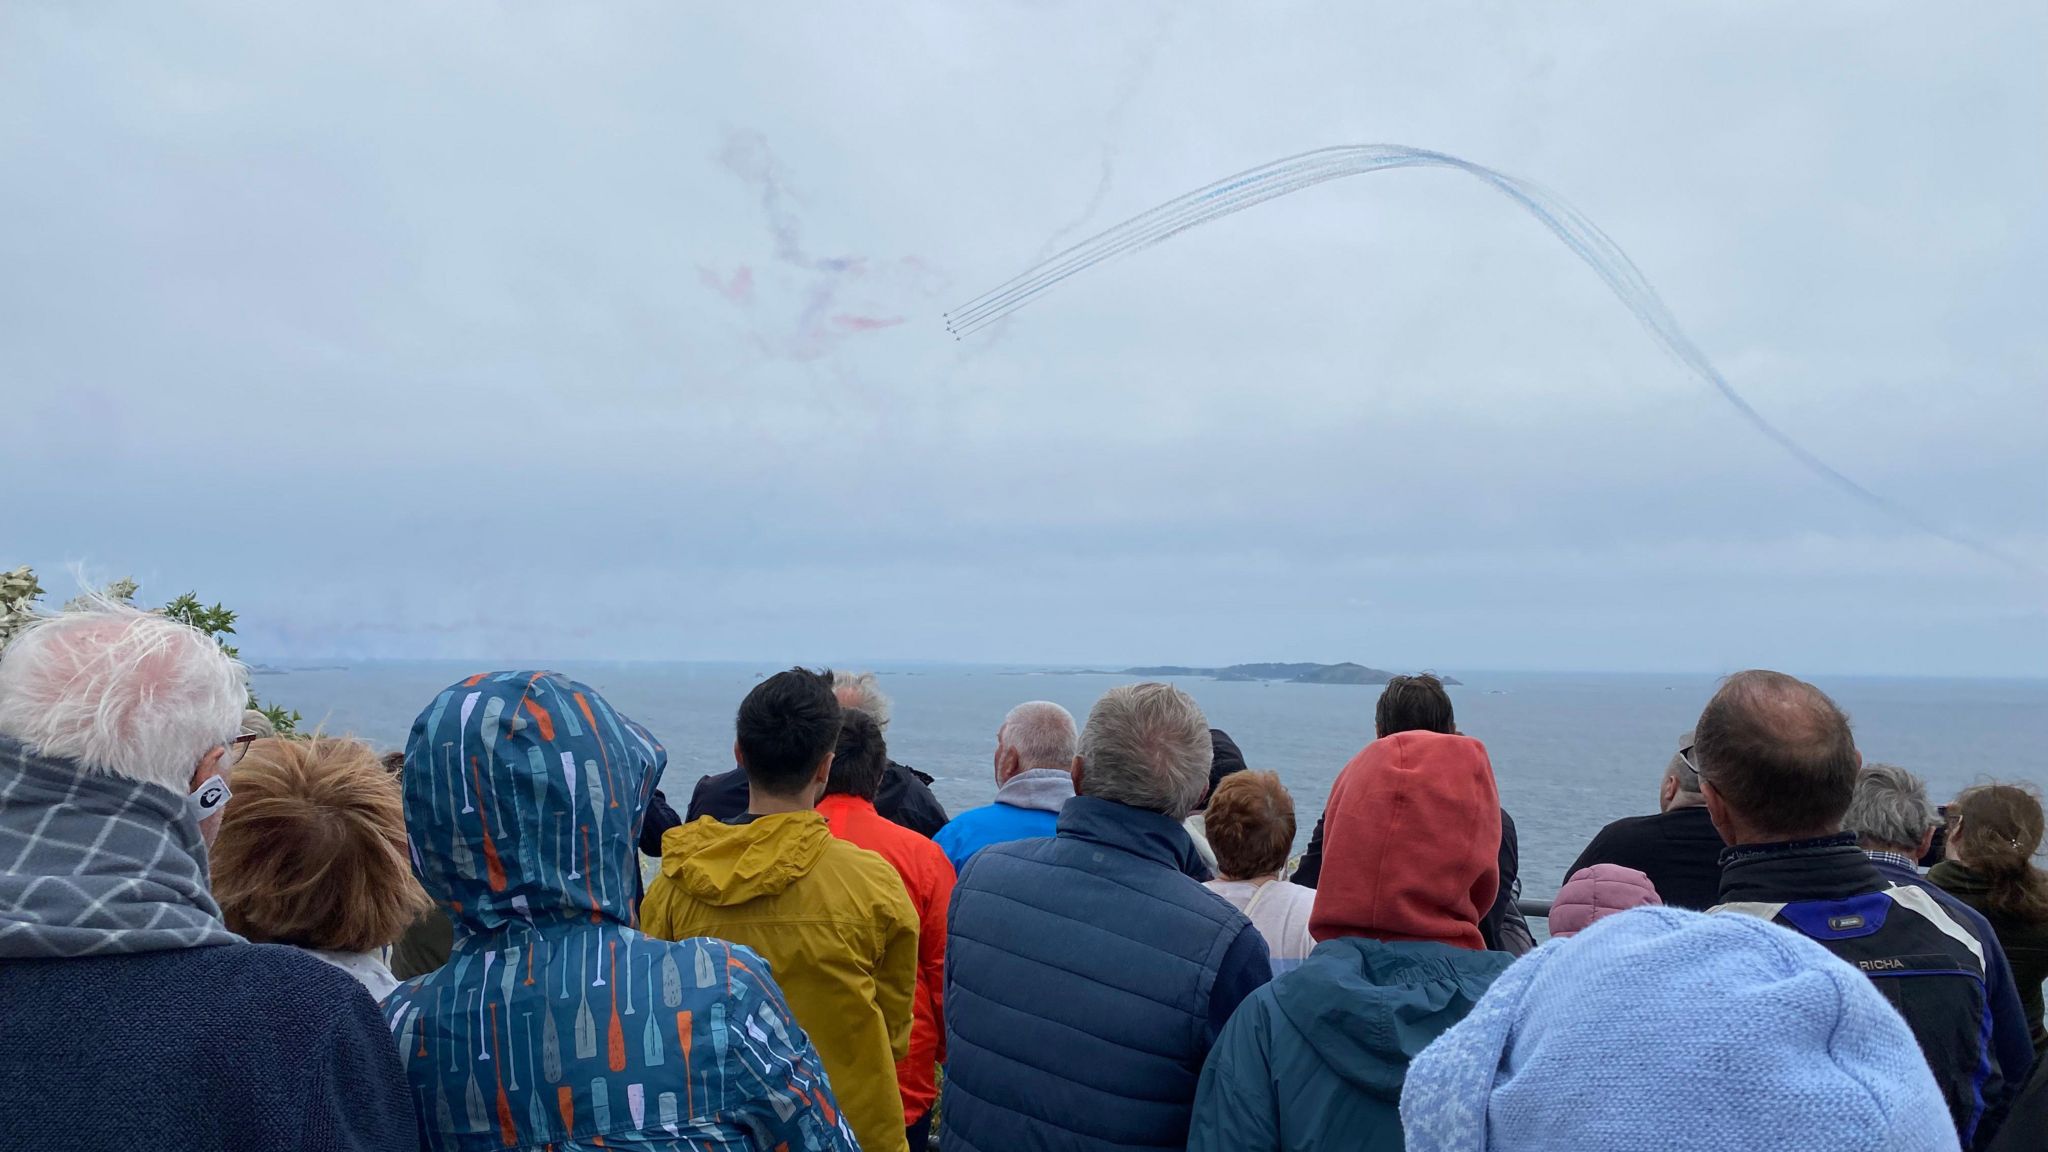 Image shows crowds watching the display